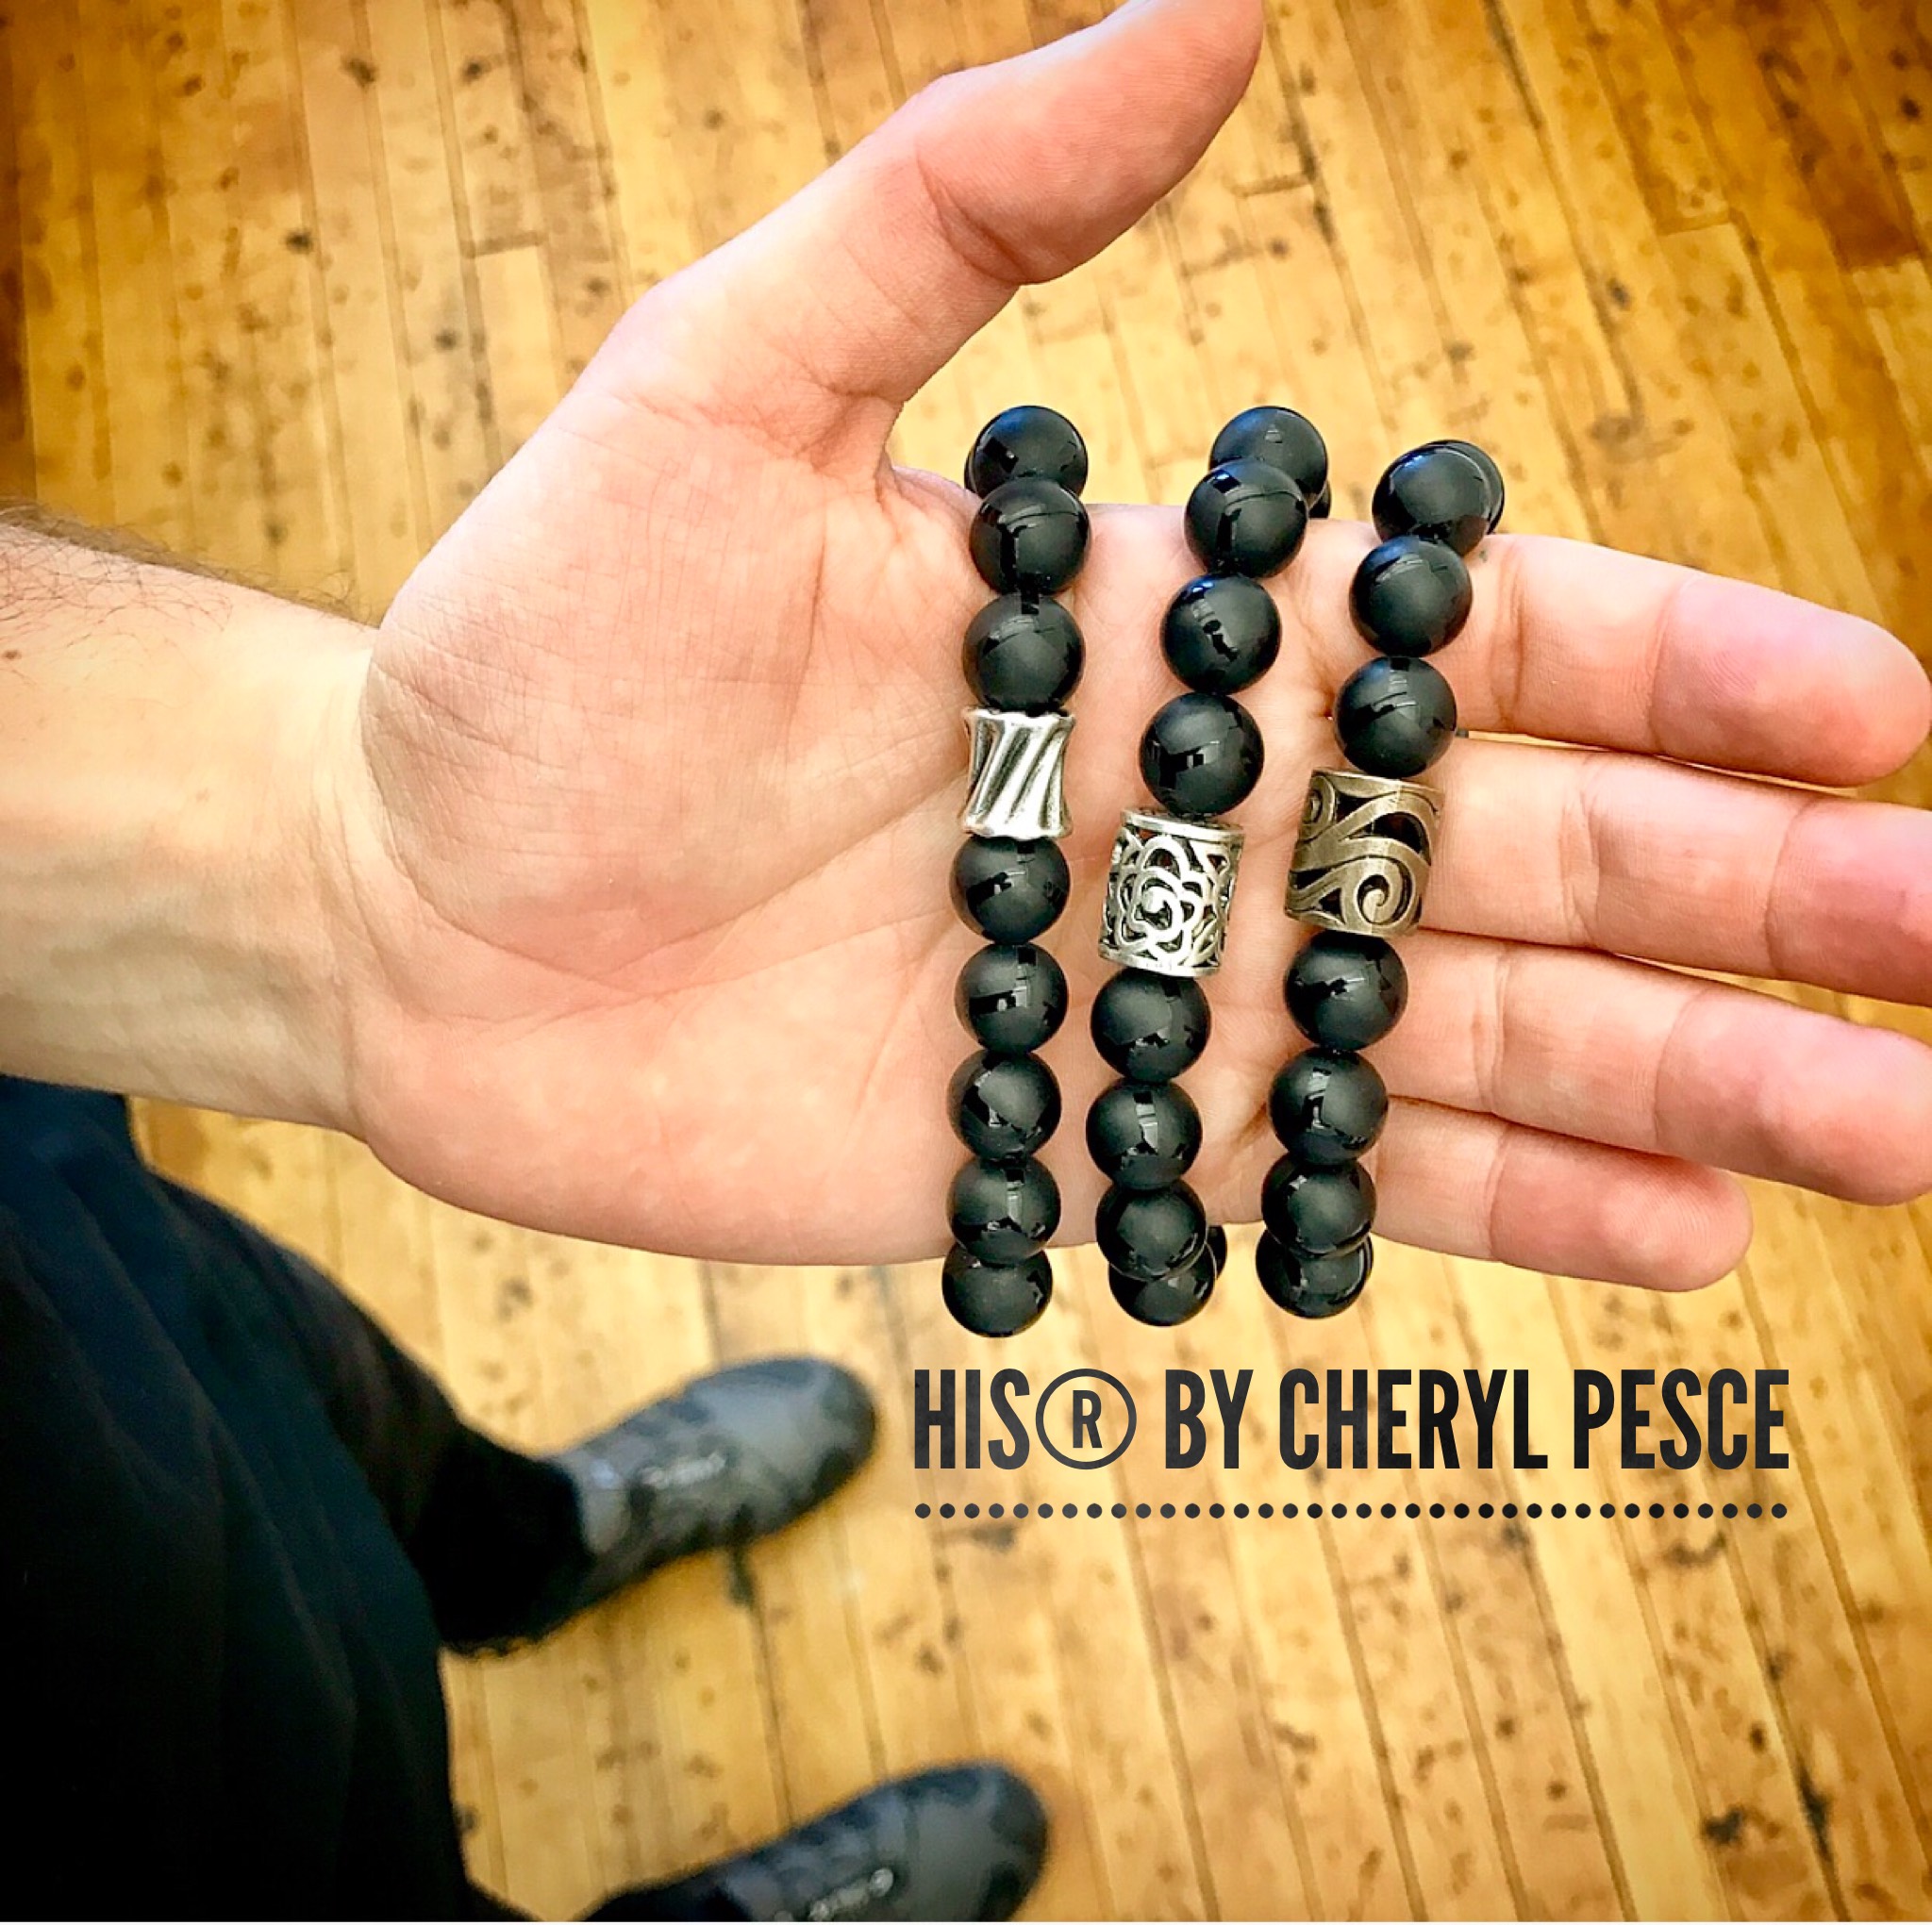 HIS ® by Cheryl Pesce